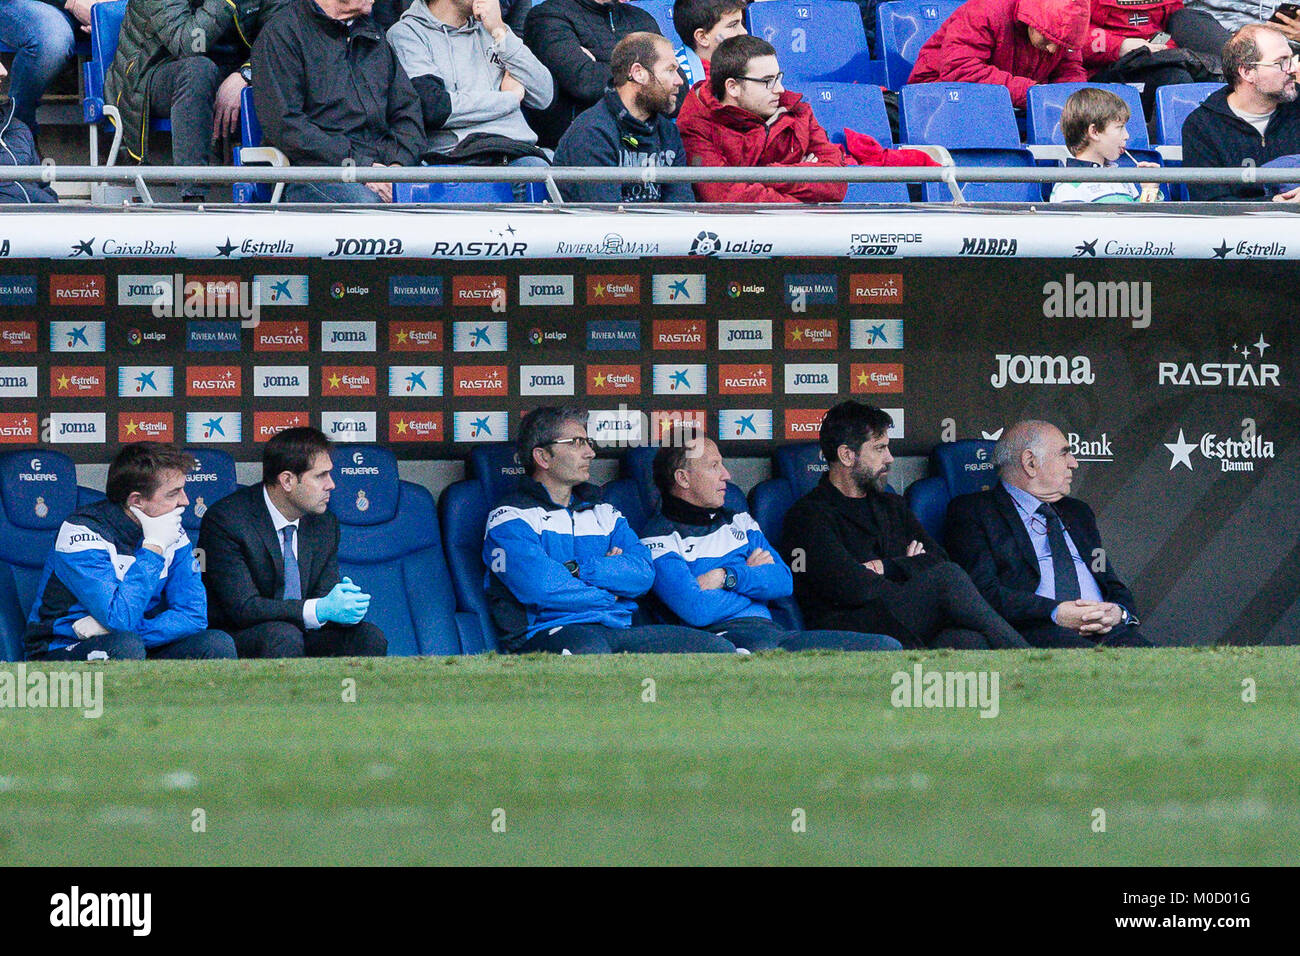 Barcelona, Spain. 20th Jan, 2018. Quique Sanchez Flores during the match between RCD Espanyol and Sevilla CF, for the round 20 of the Liga Santander, played at RCDE Stadium on 20th January 2018 in Barcelona, Spain. Credit: Gtres Información más Comuniación on line, S.L./Alamy Live News Stock Photo